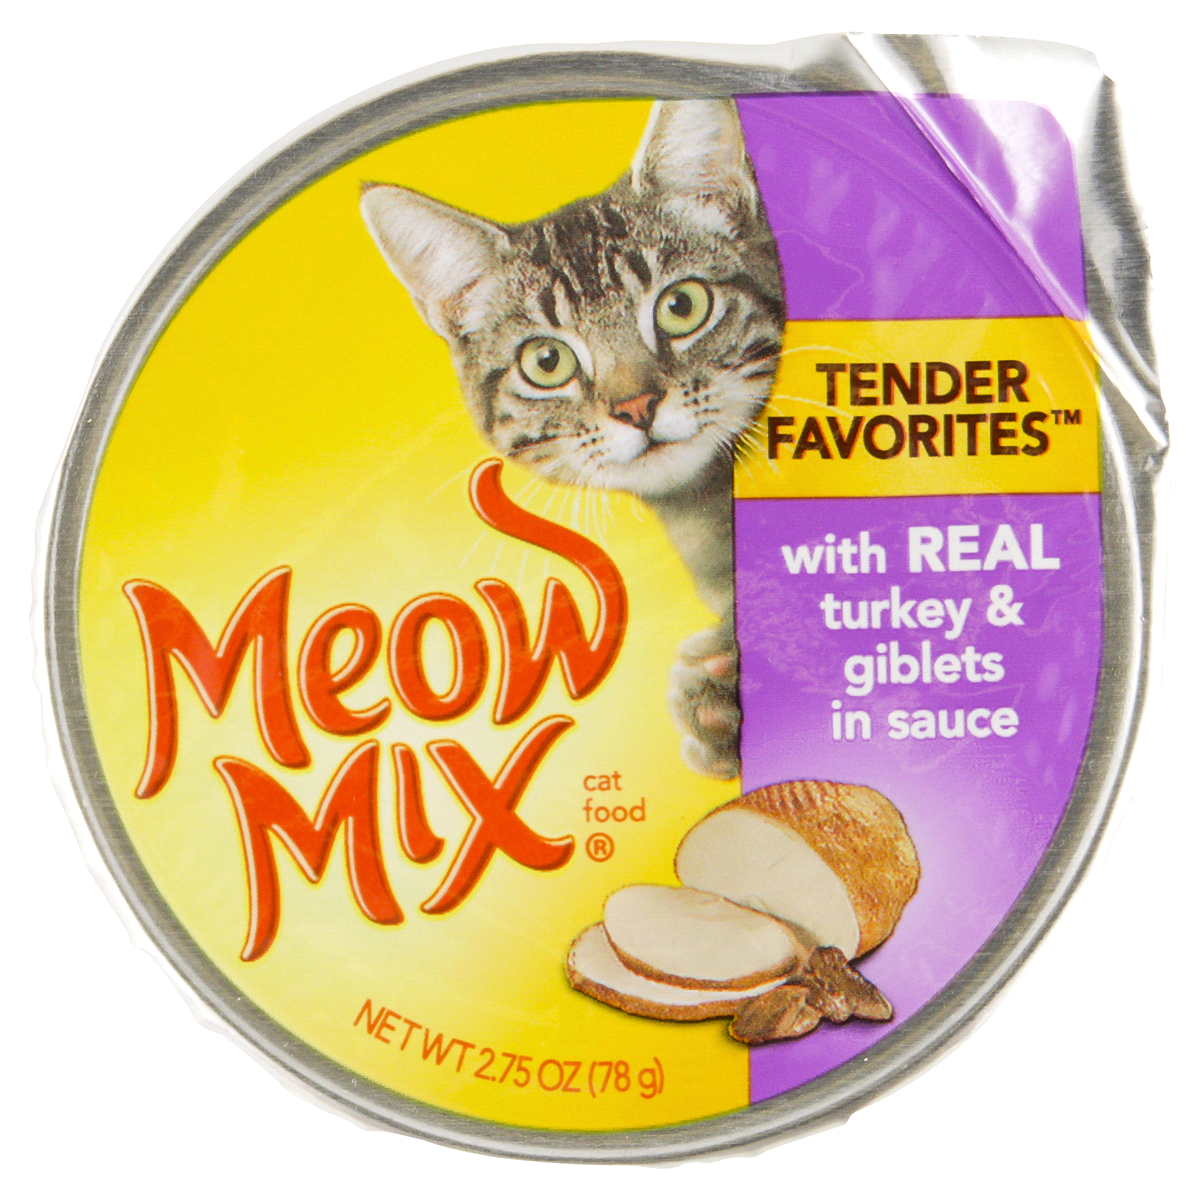 Meow Mix Tender Favorites Tuna & Whole Shrimp in Sauce Wet Cat Food 2